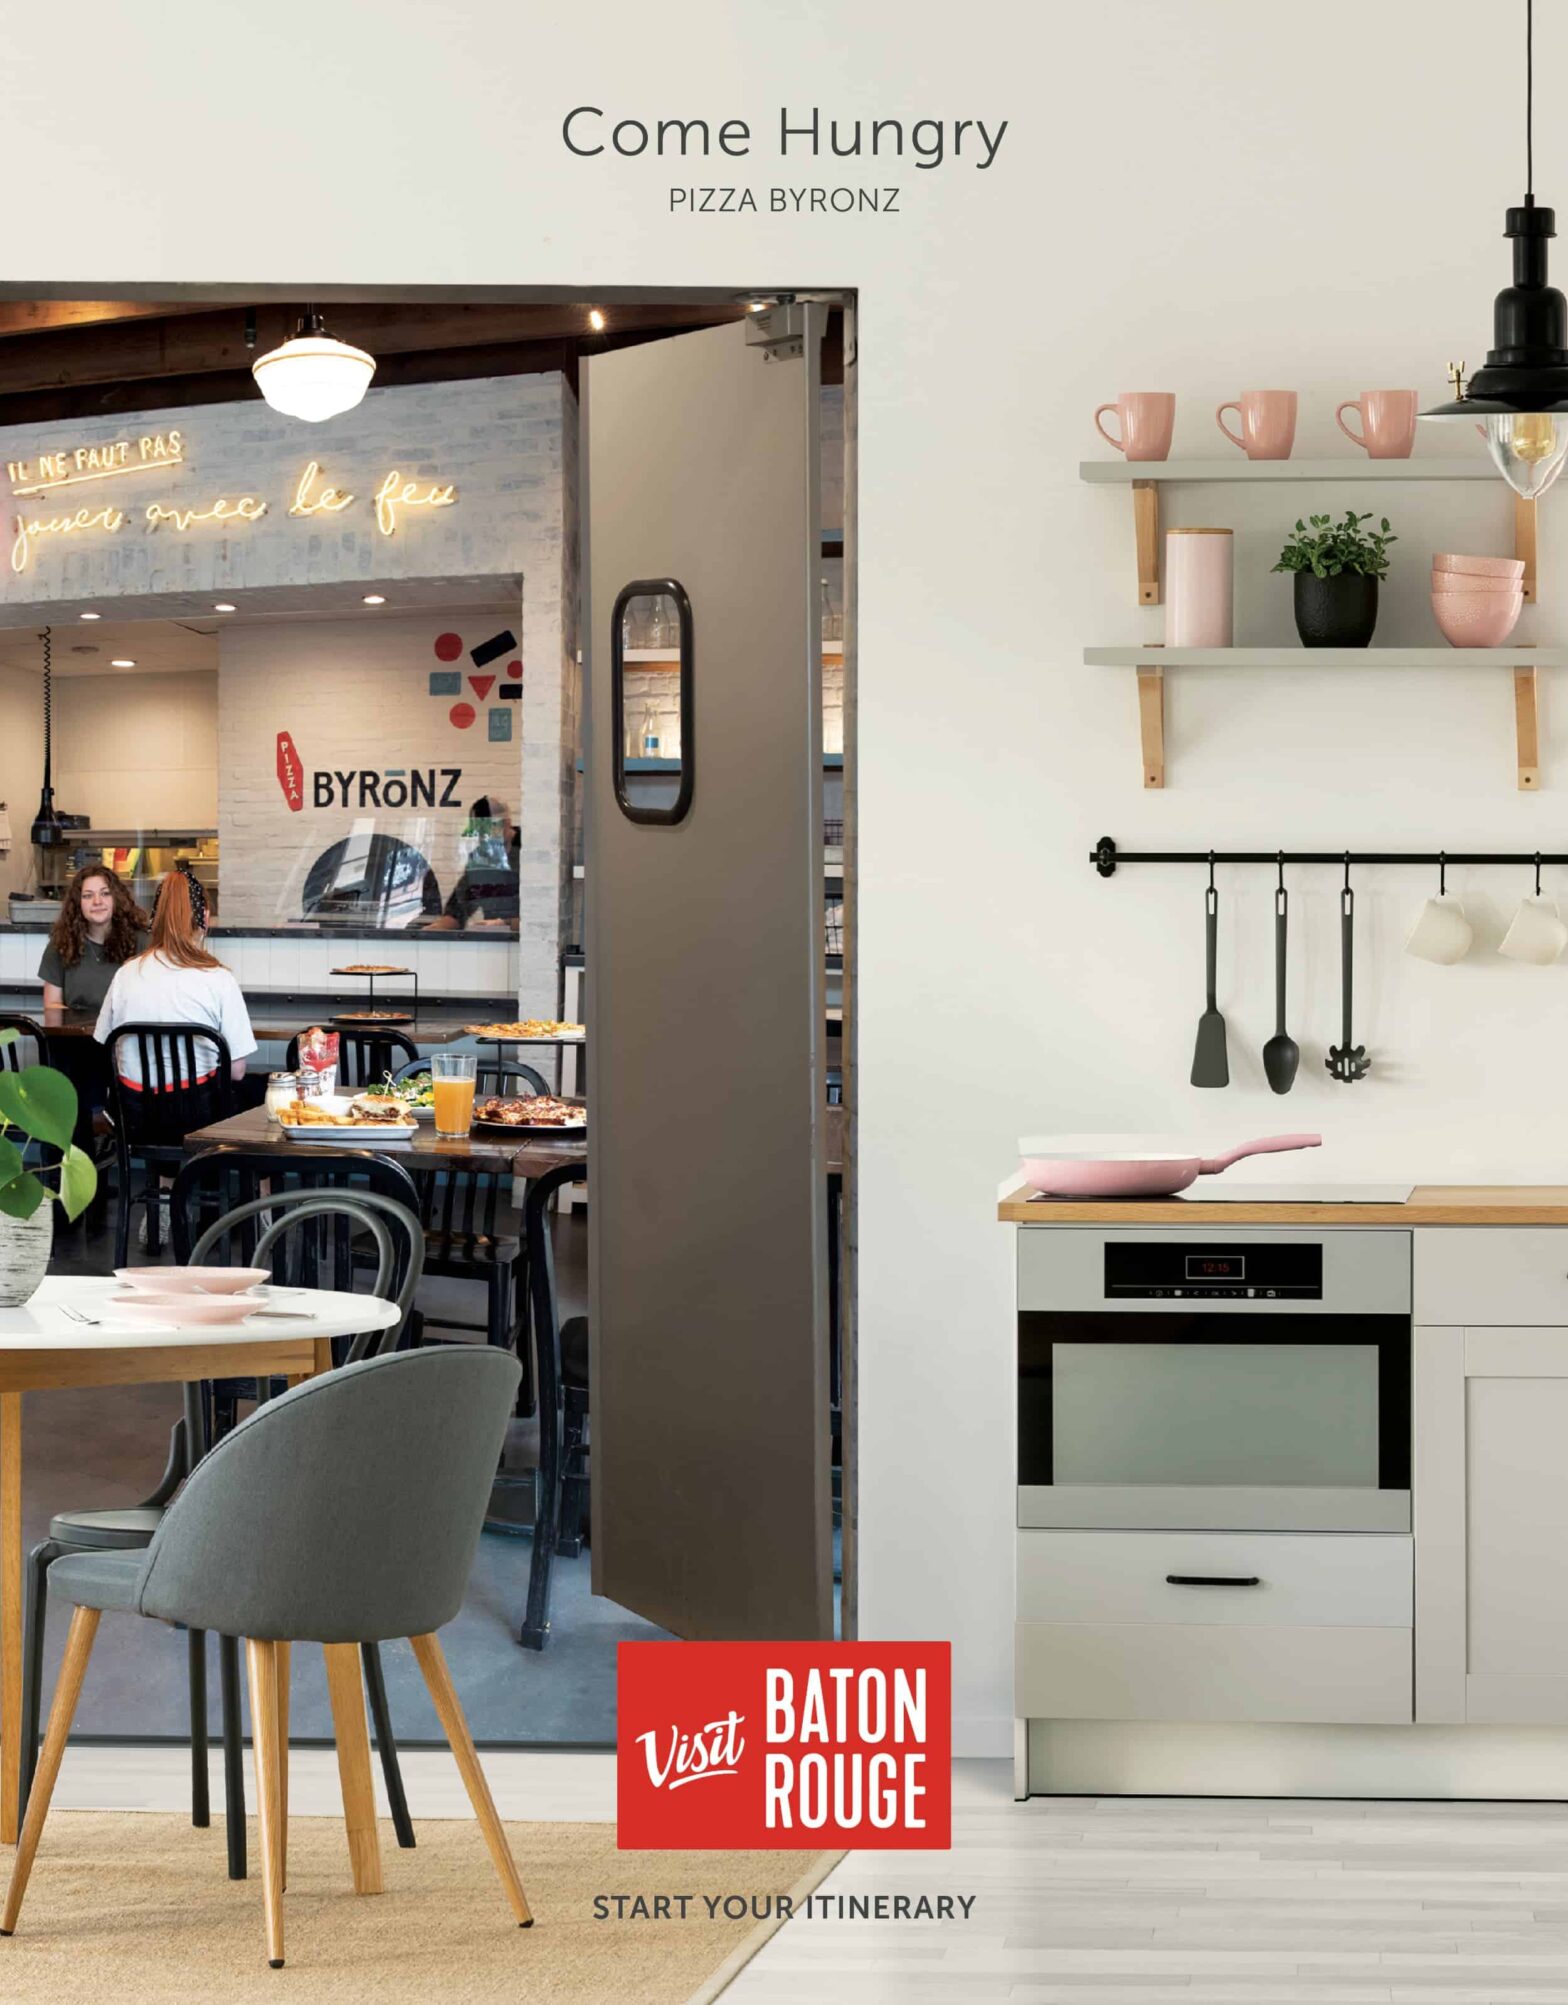 Poster ad. A restaurant kitchen door in a home kitchen, captioned "Come Hungry: Pizza Byronz"